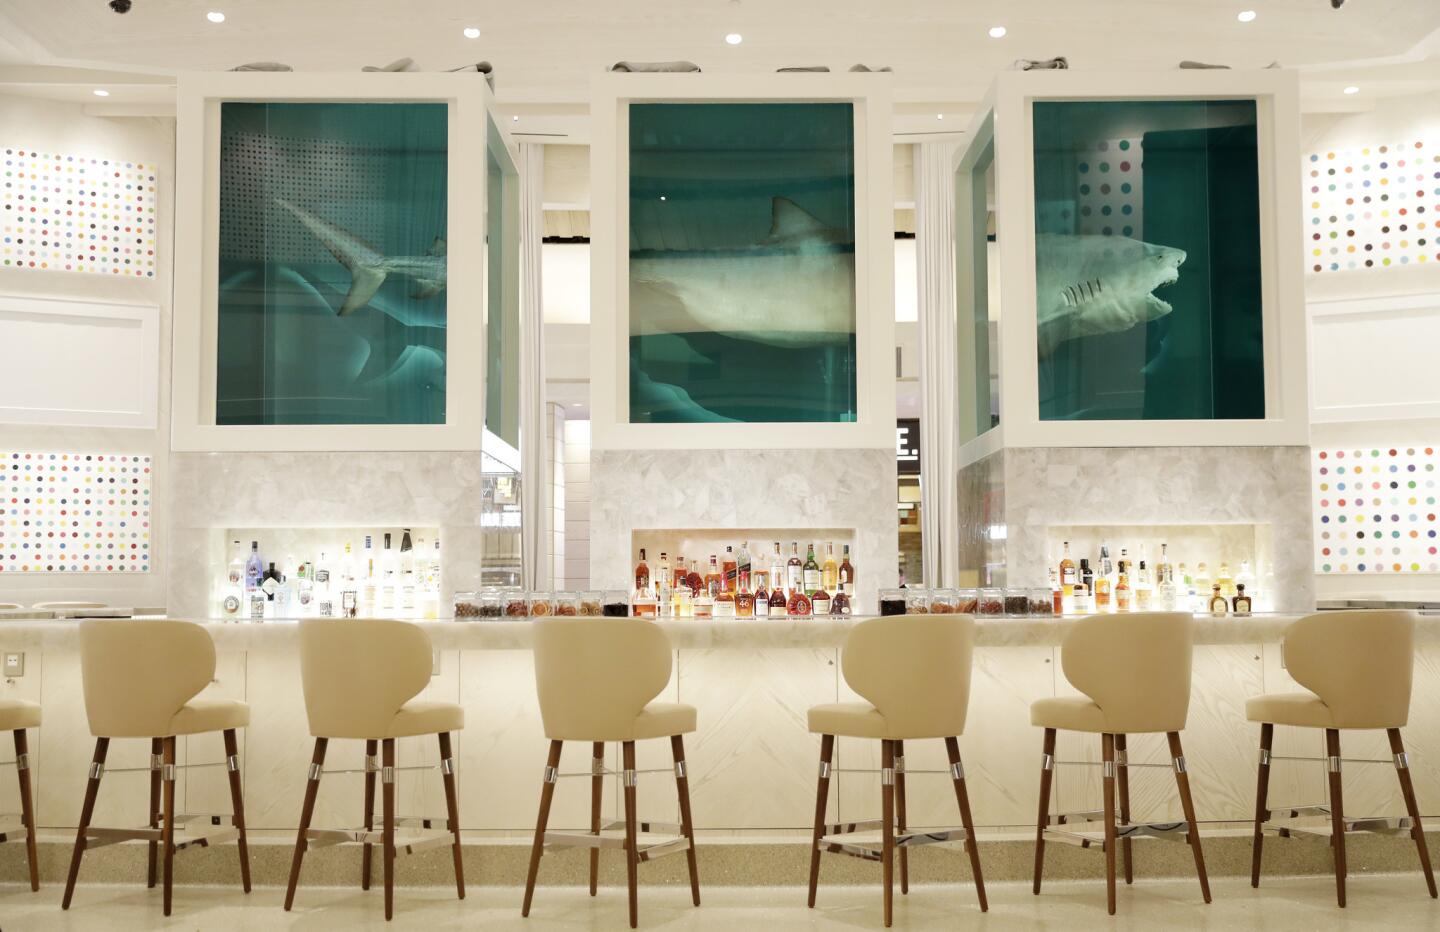 Artist Damien Hirst's shark work will be on view at a new bar of his design at the Palms Casino Resort in Las Vegas.